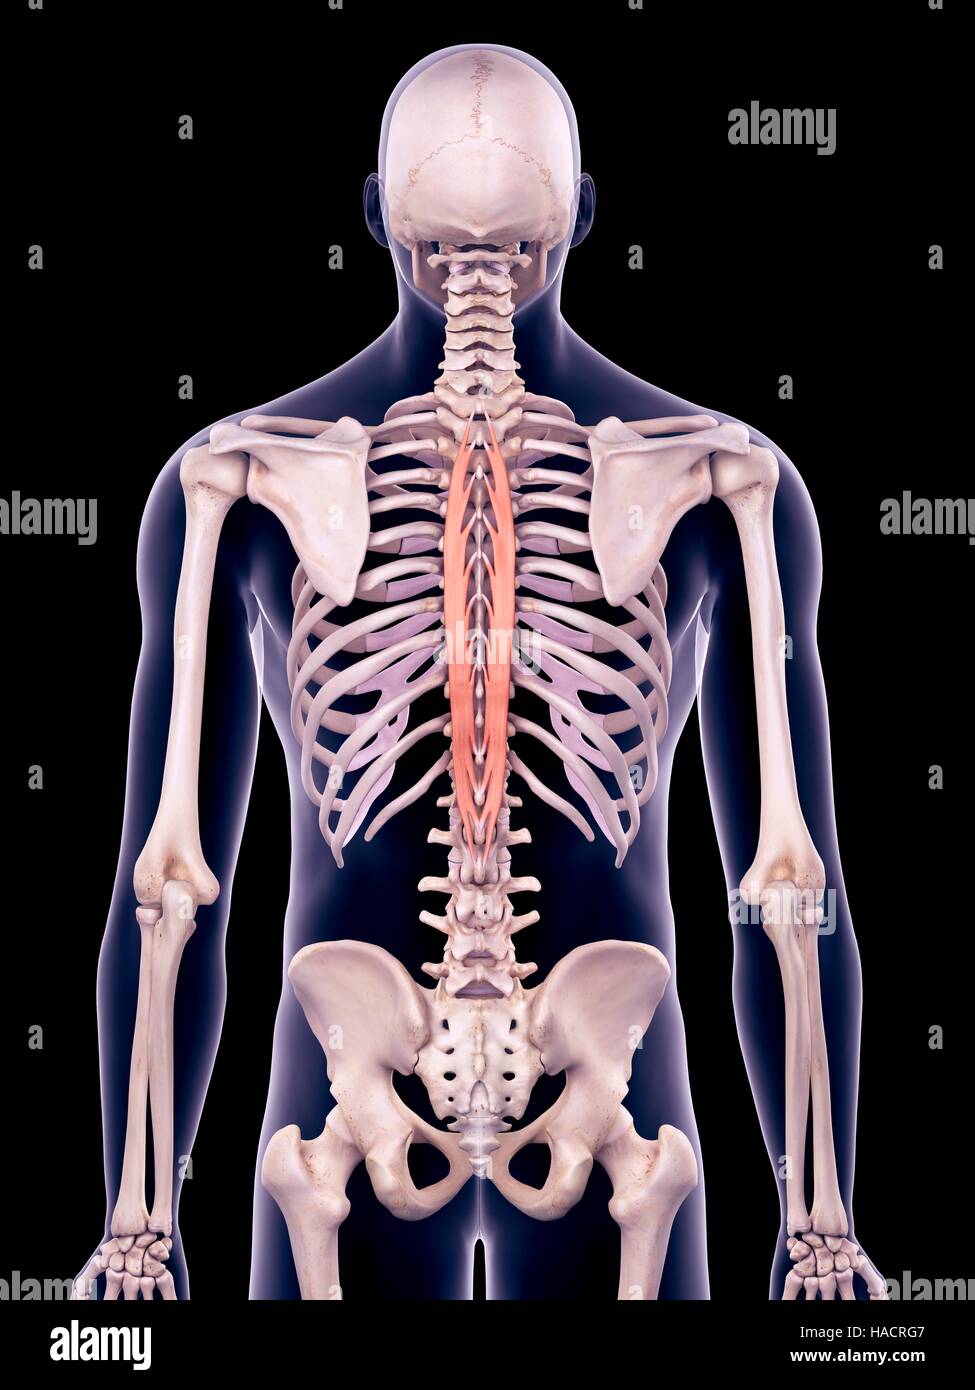 Illustration of the spinalis thoracic muscles. Stock Photo